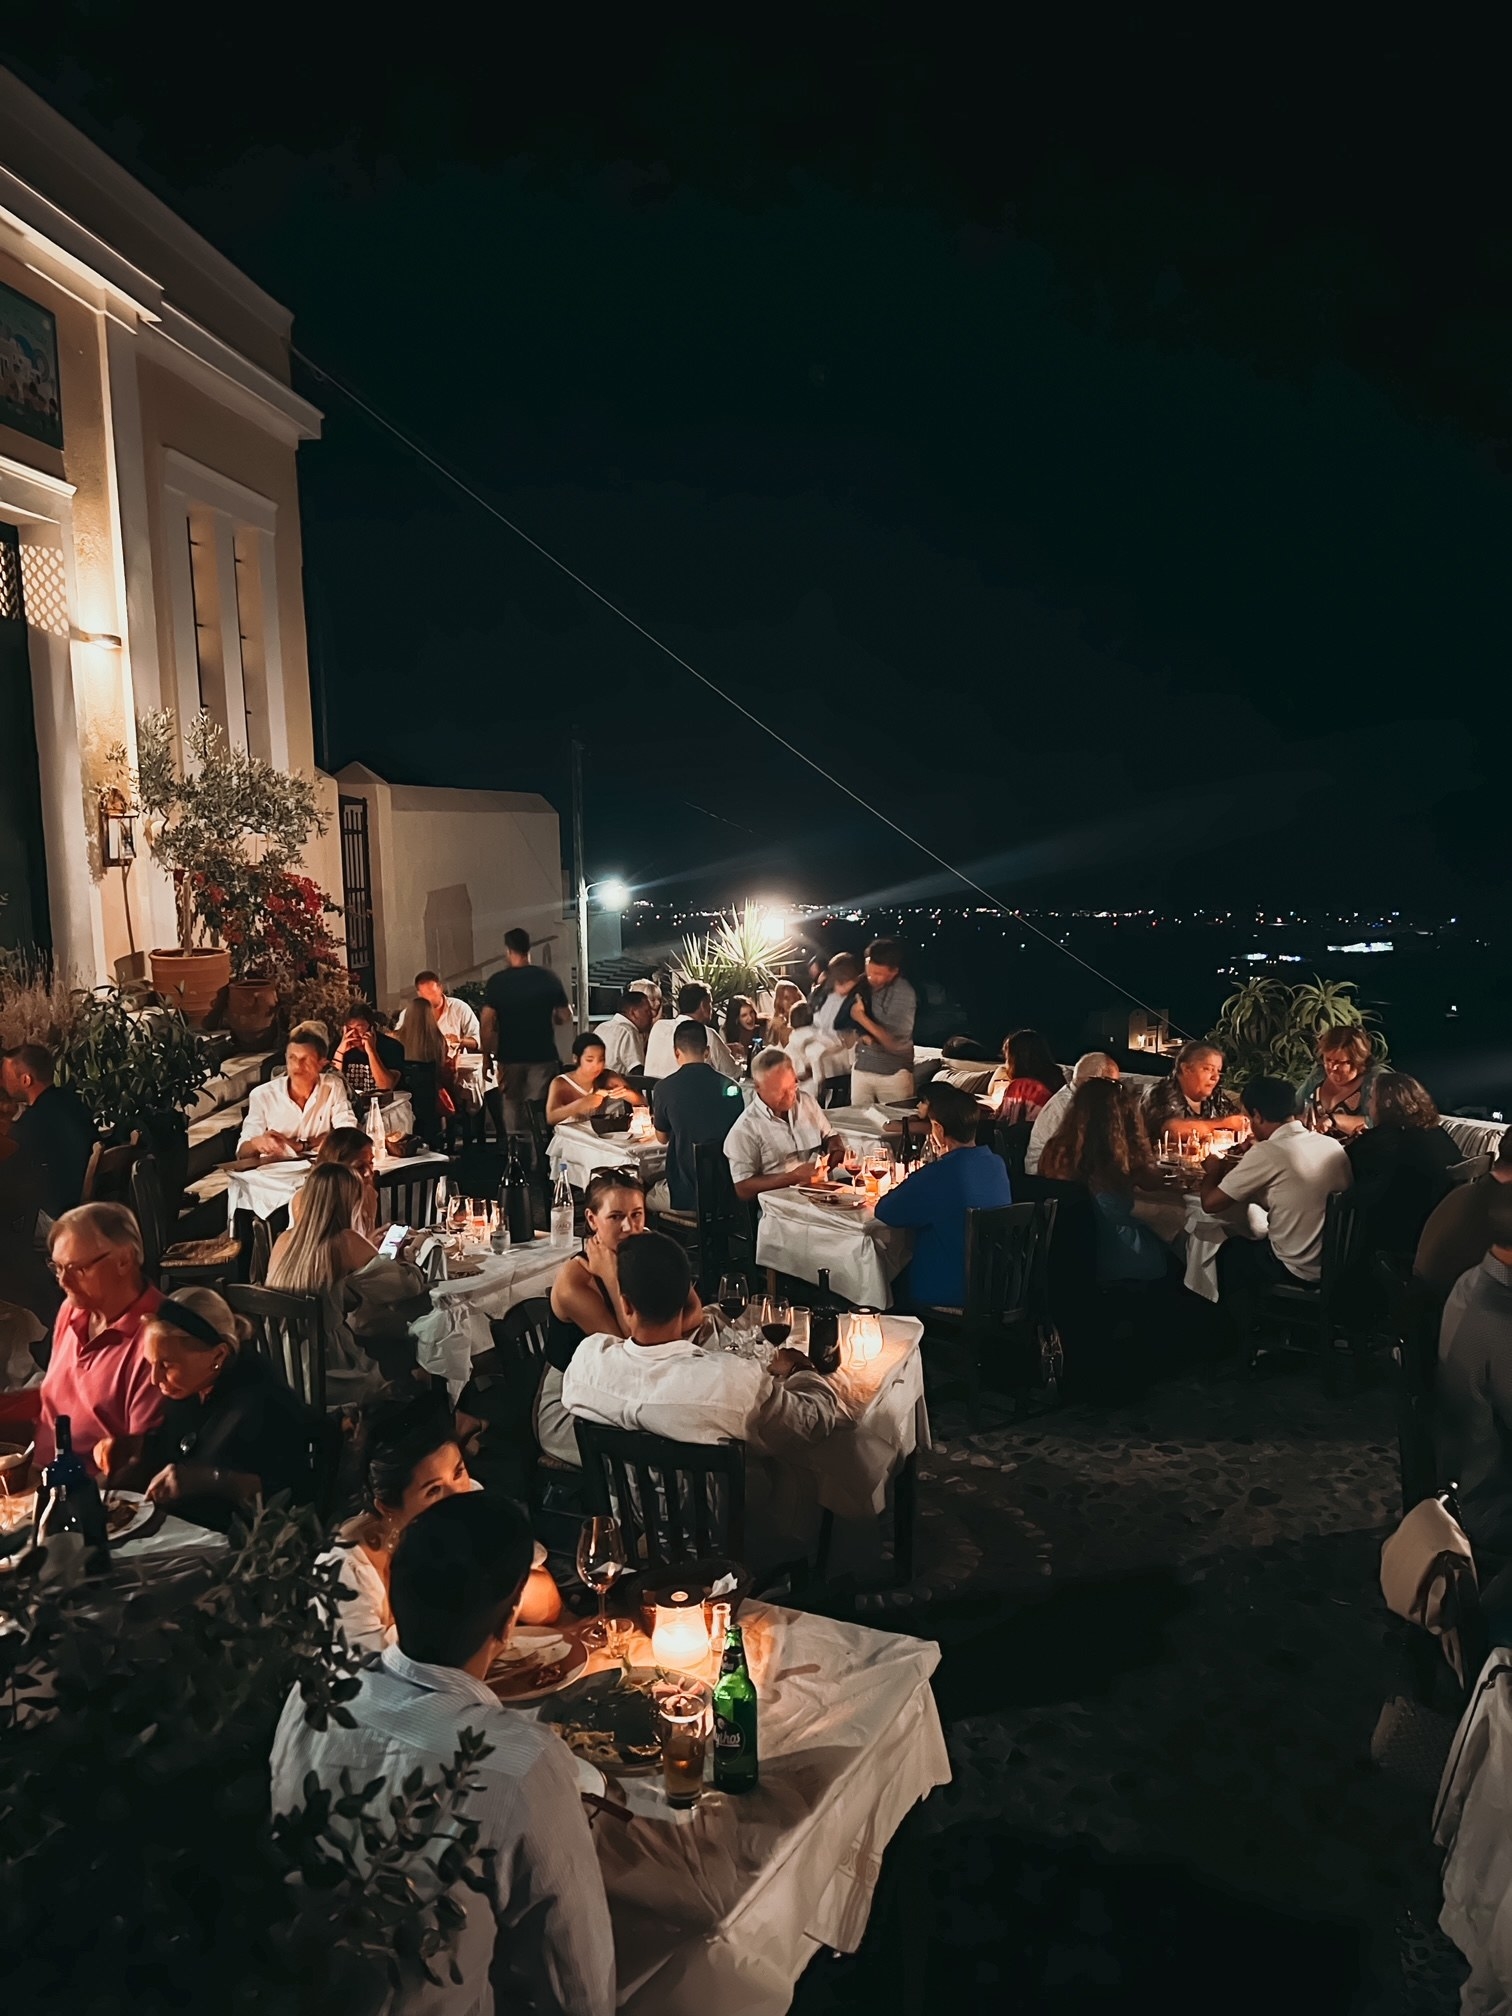 People dining outdoors at night.